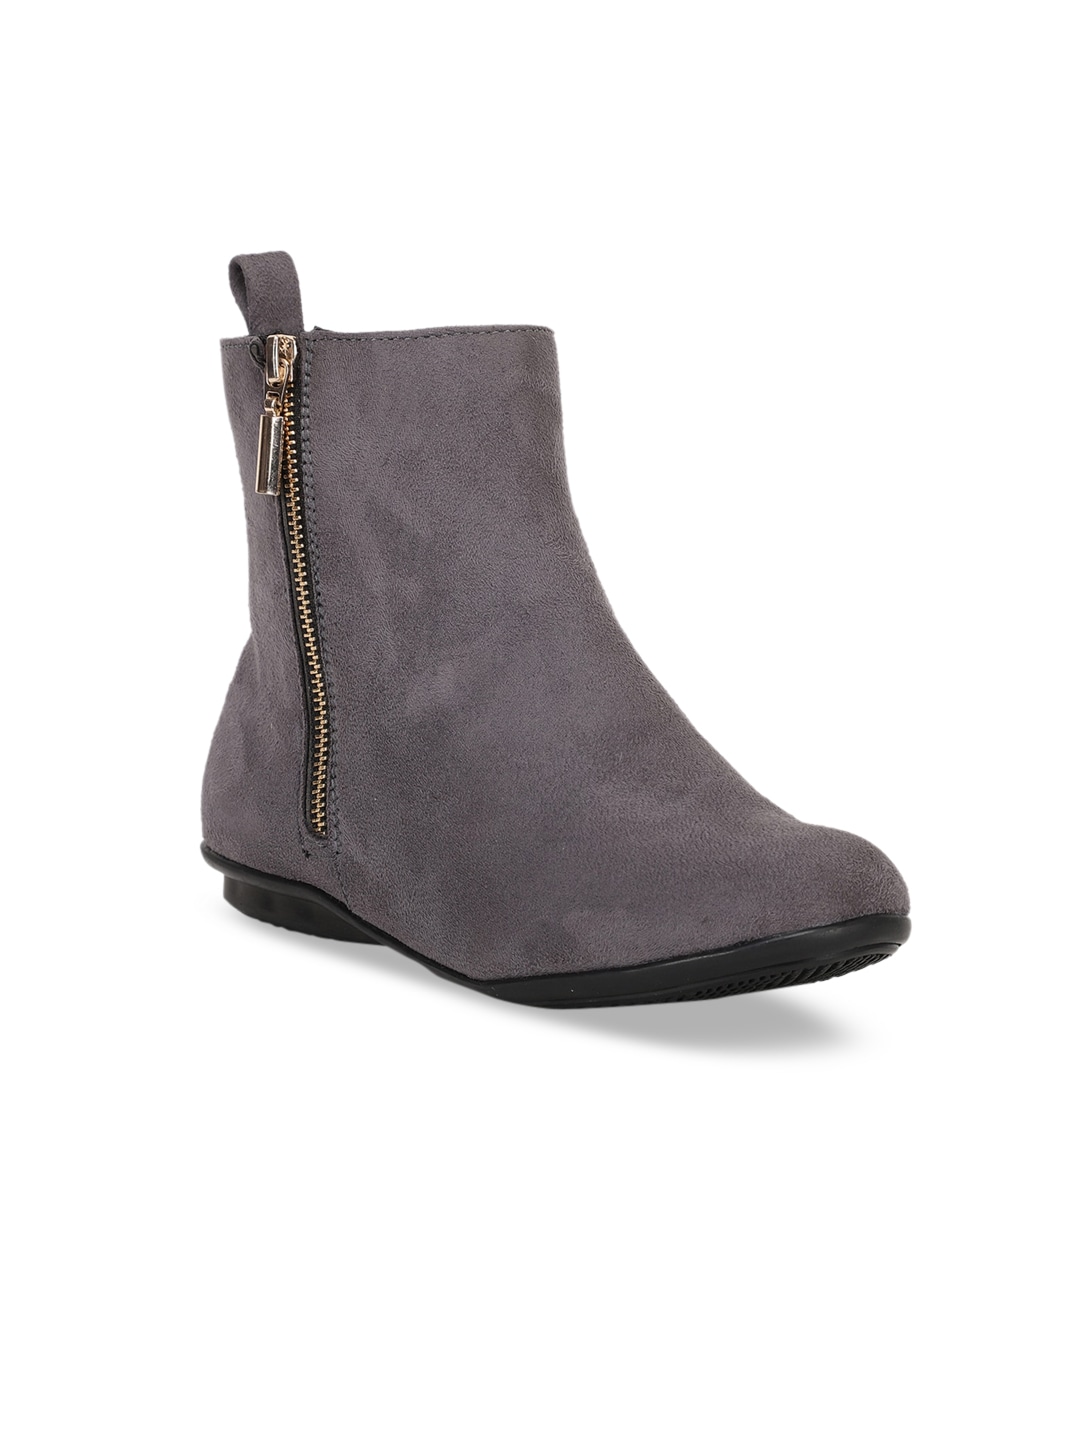 Bruno Manetti Women Grey Solid Suede Mid-Top Flat Boots Price in India